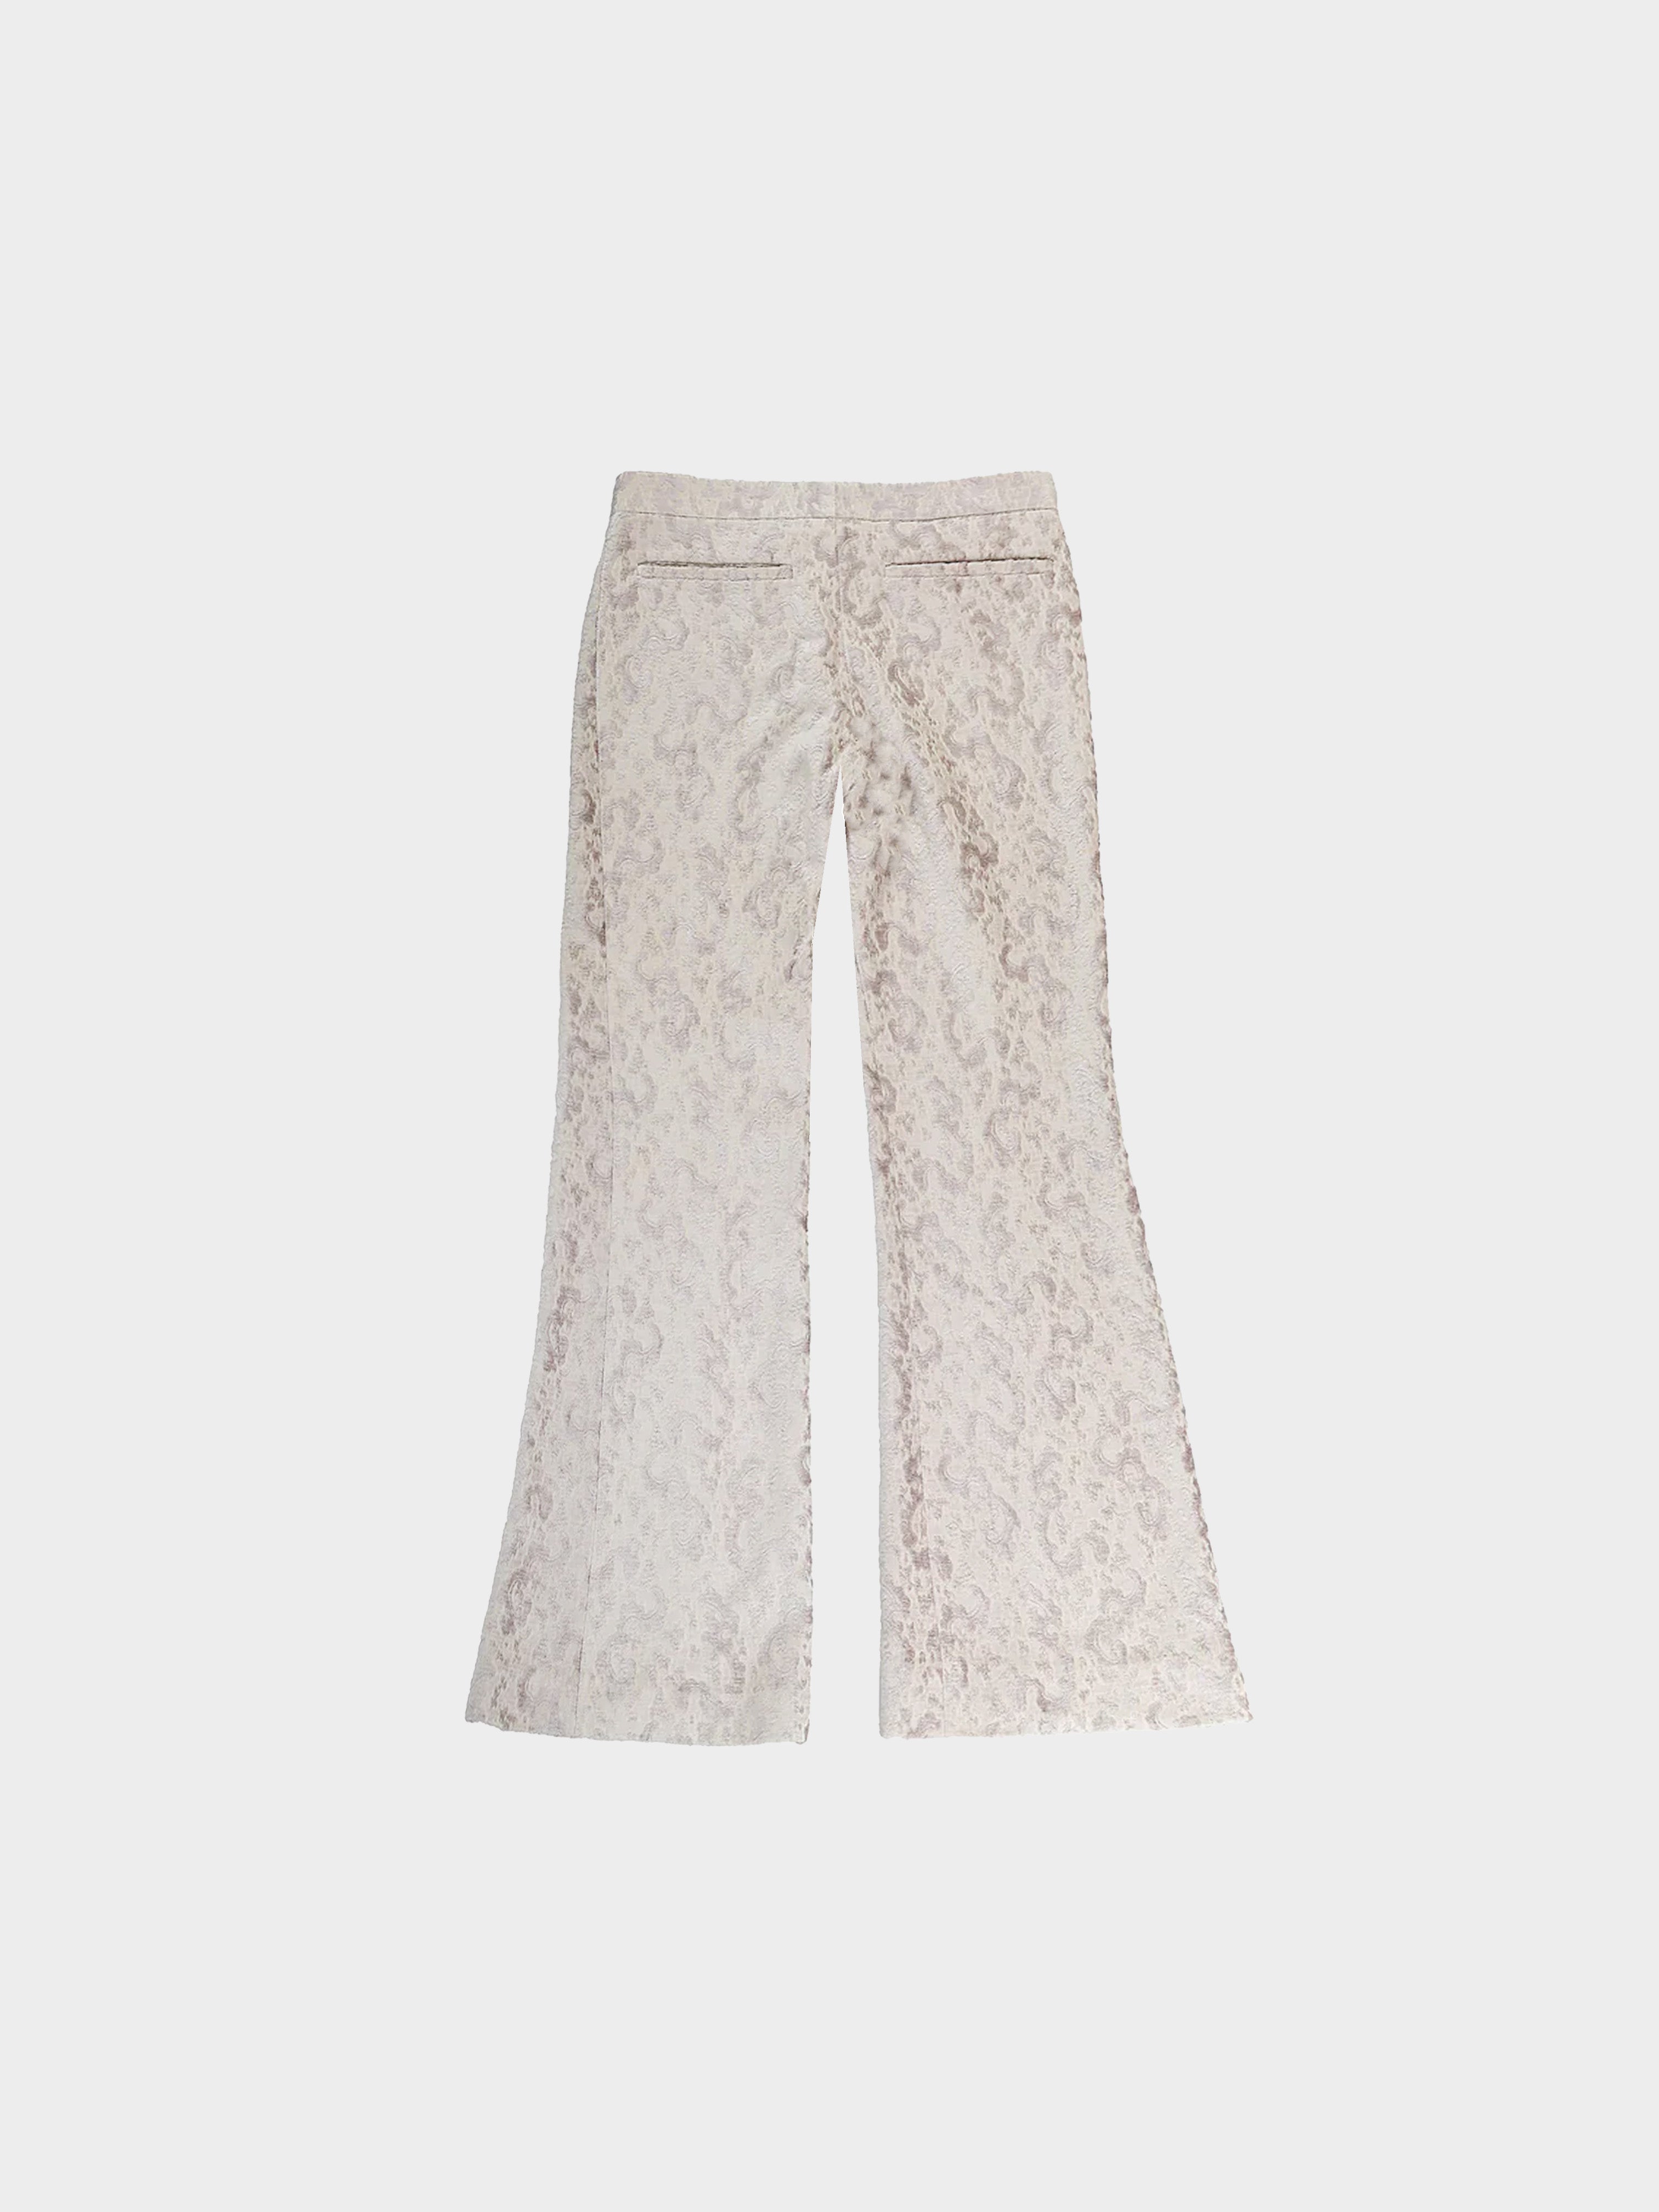 Gucci by Tom Ford SS 2000 Ivory Jacquard Pants